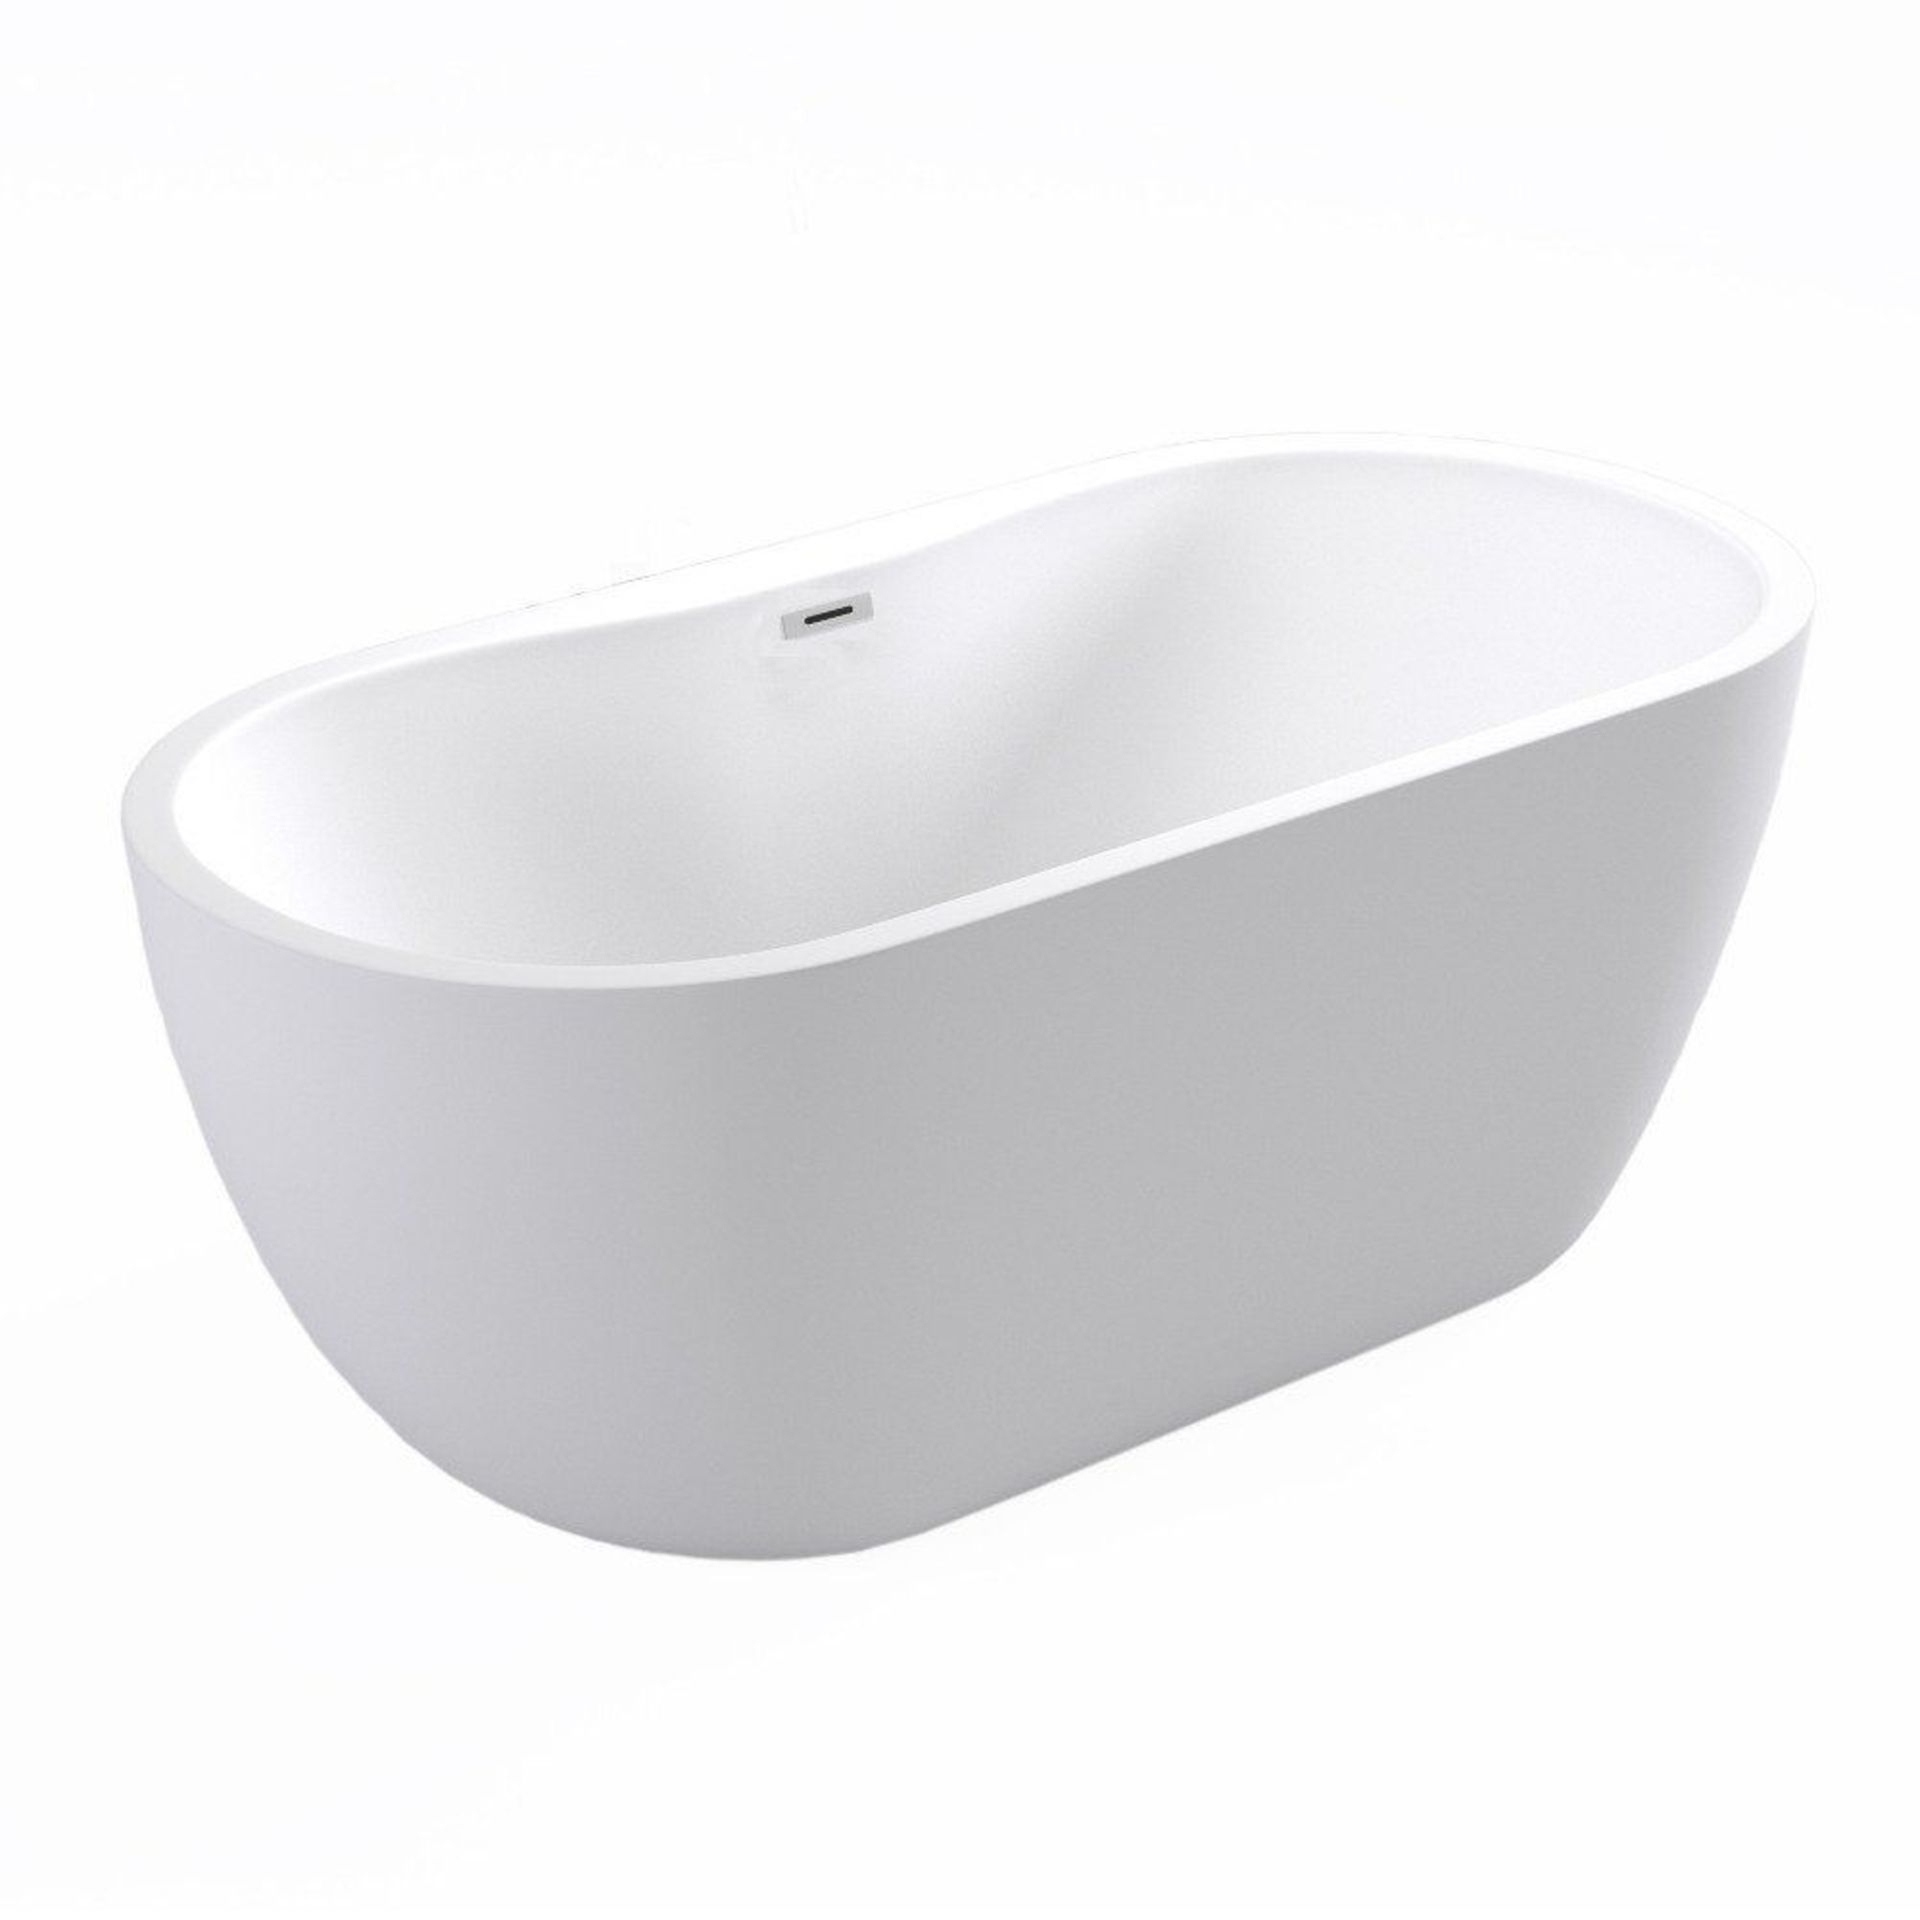 New (U2) 1655x740mm Round Double Ended Freestanding Bath. Showcasing Style Charm For A Centre P... - Image 2 of 2